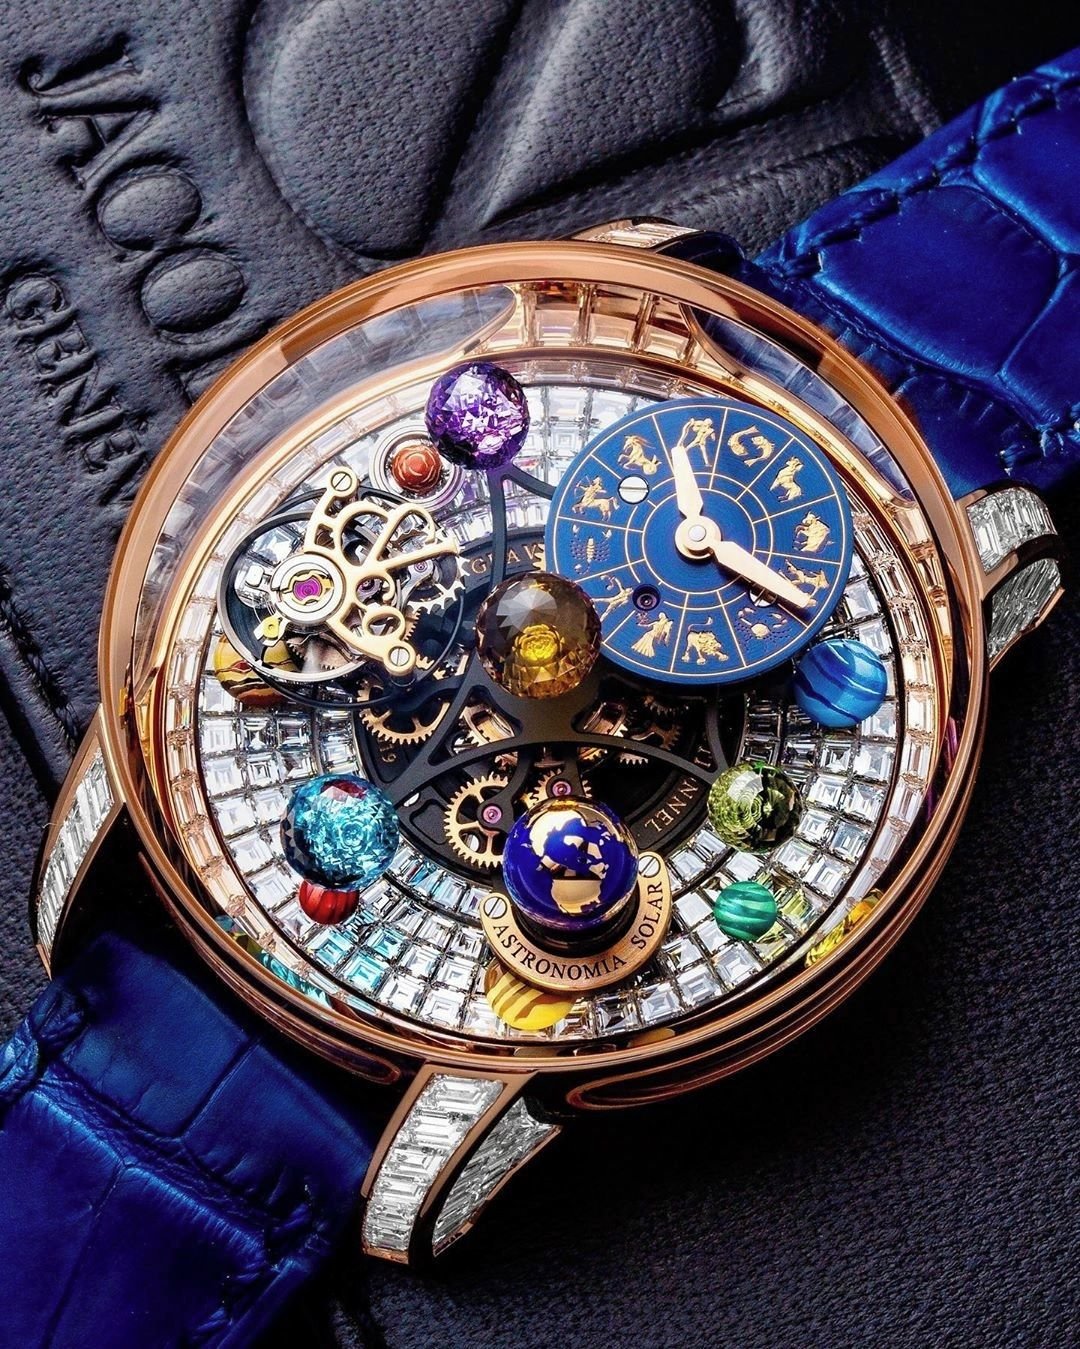 10 Most Expensive Watch Brands in the World 